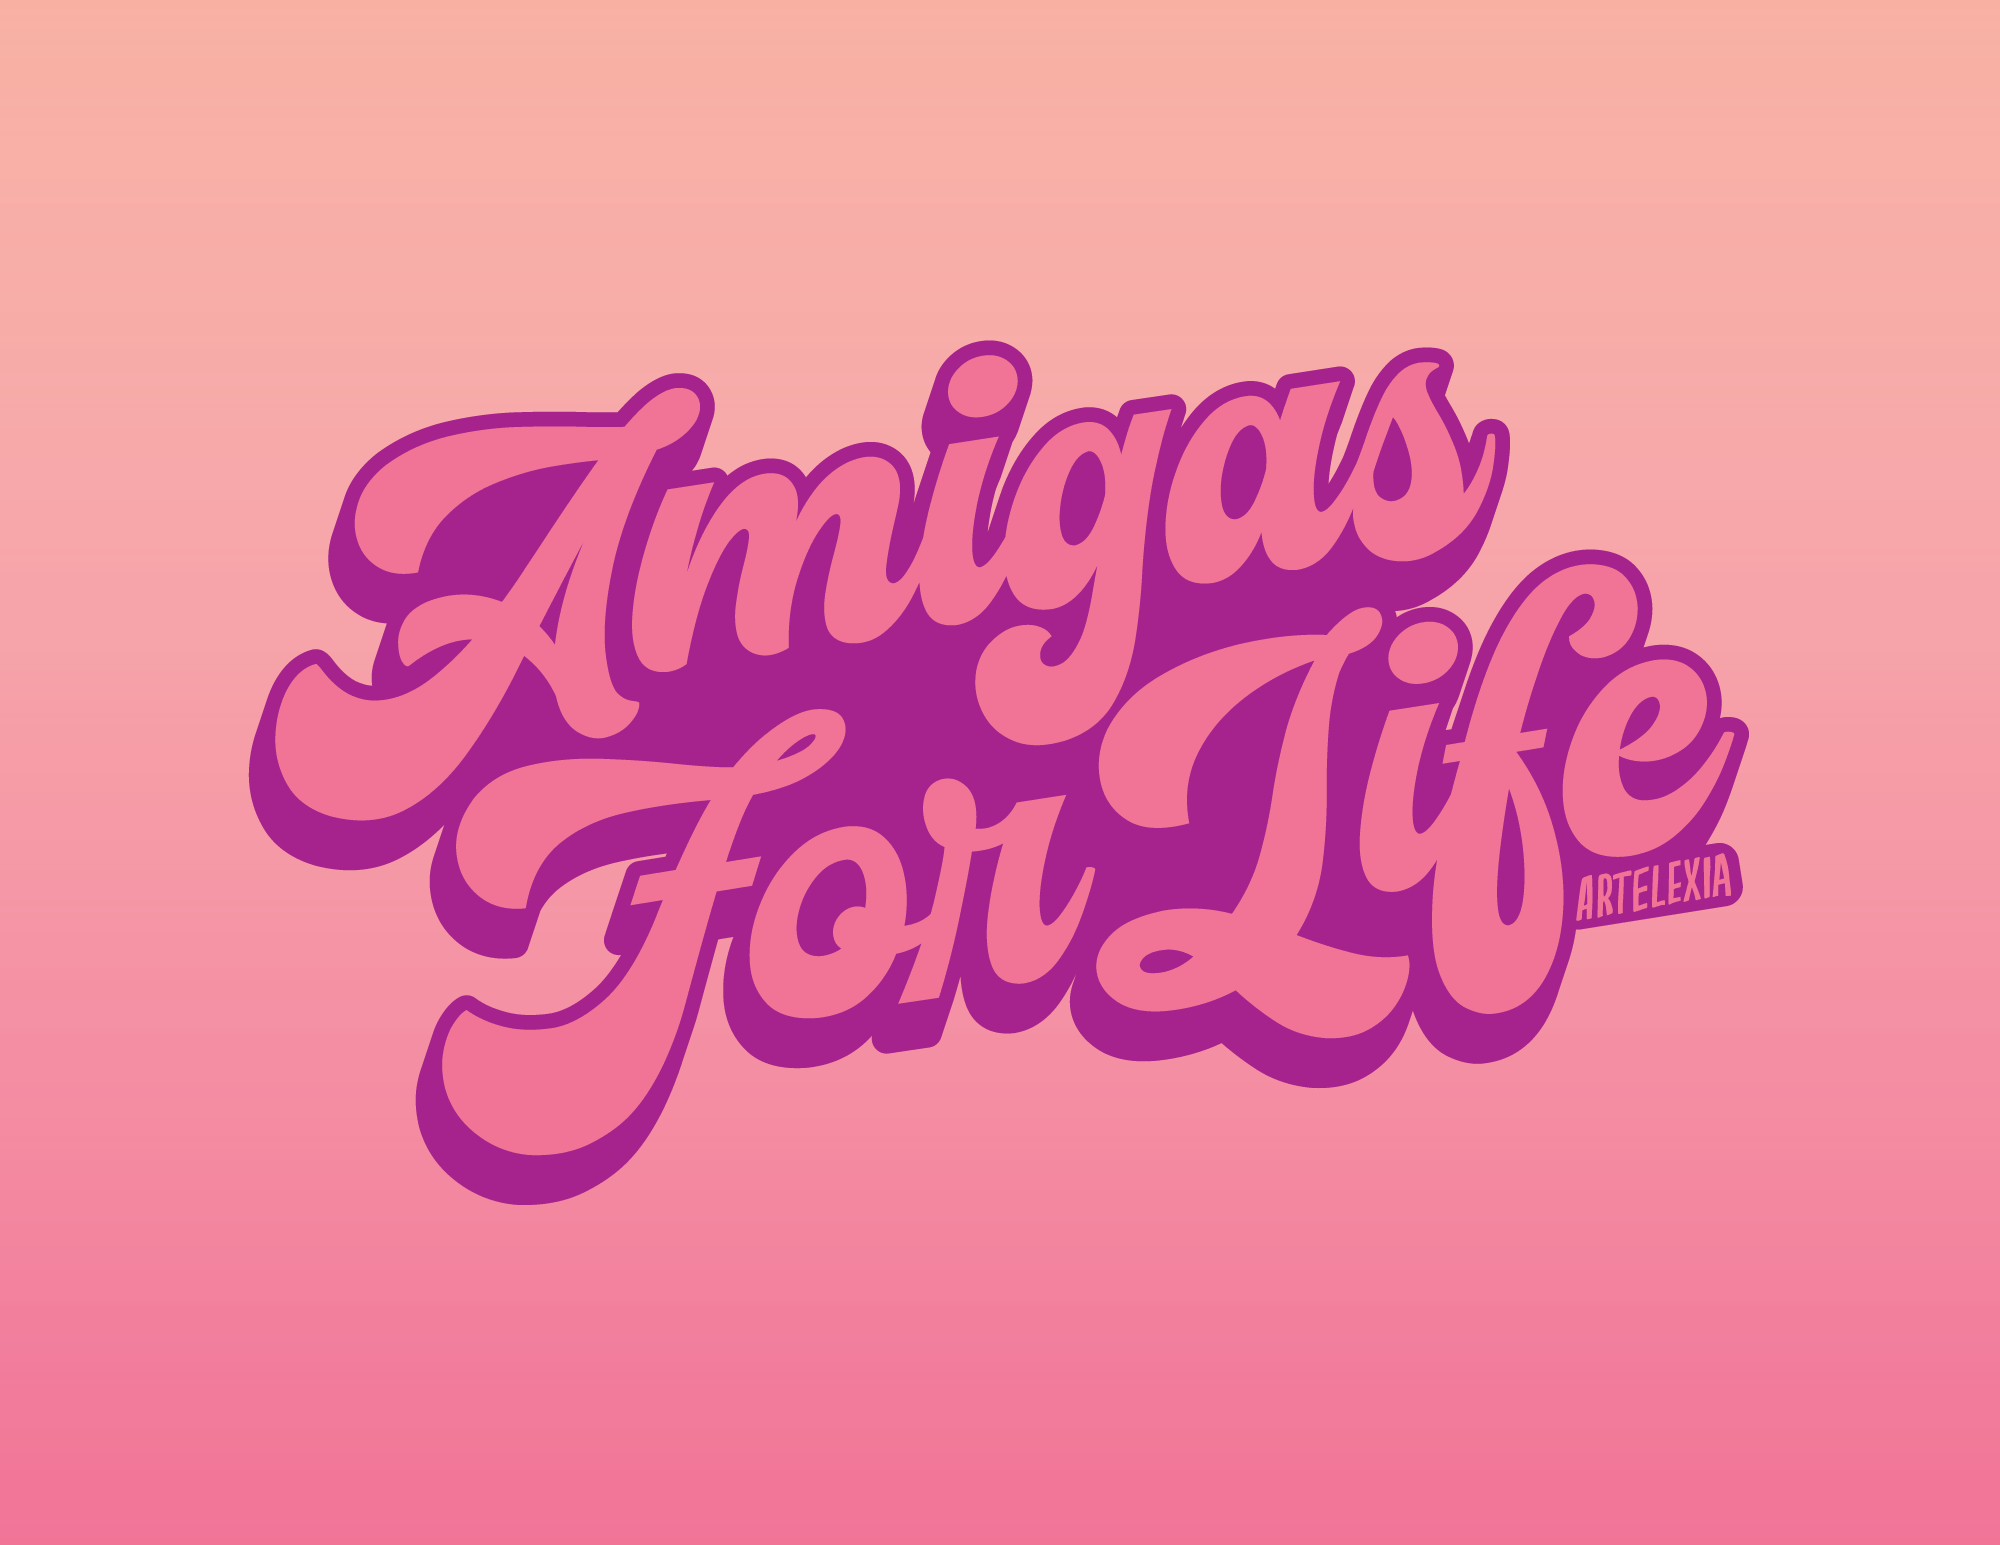 Graphic reads "Amigas For Life" in pink/purple decorative font